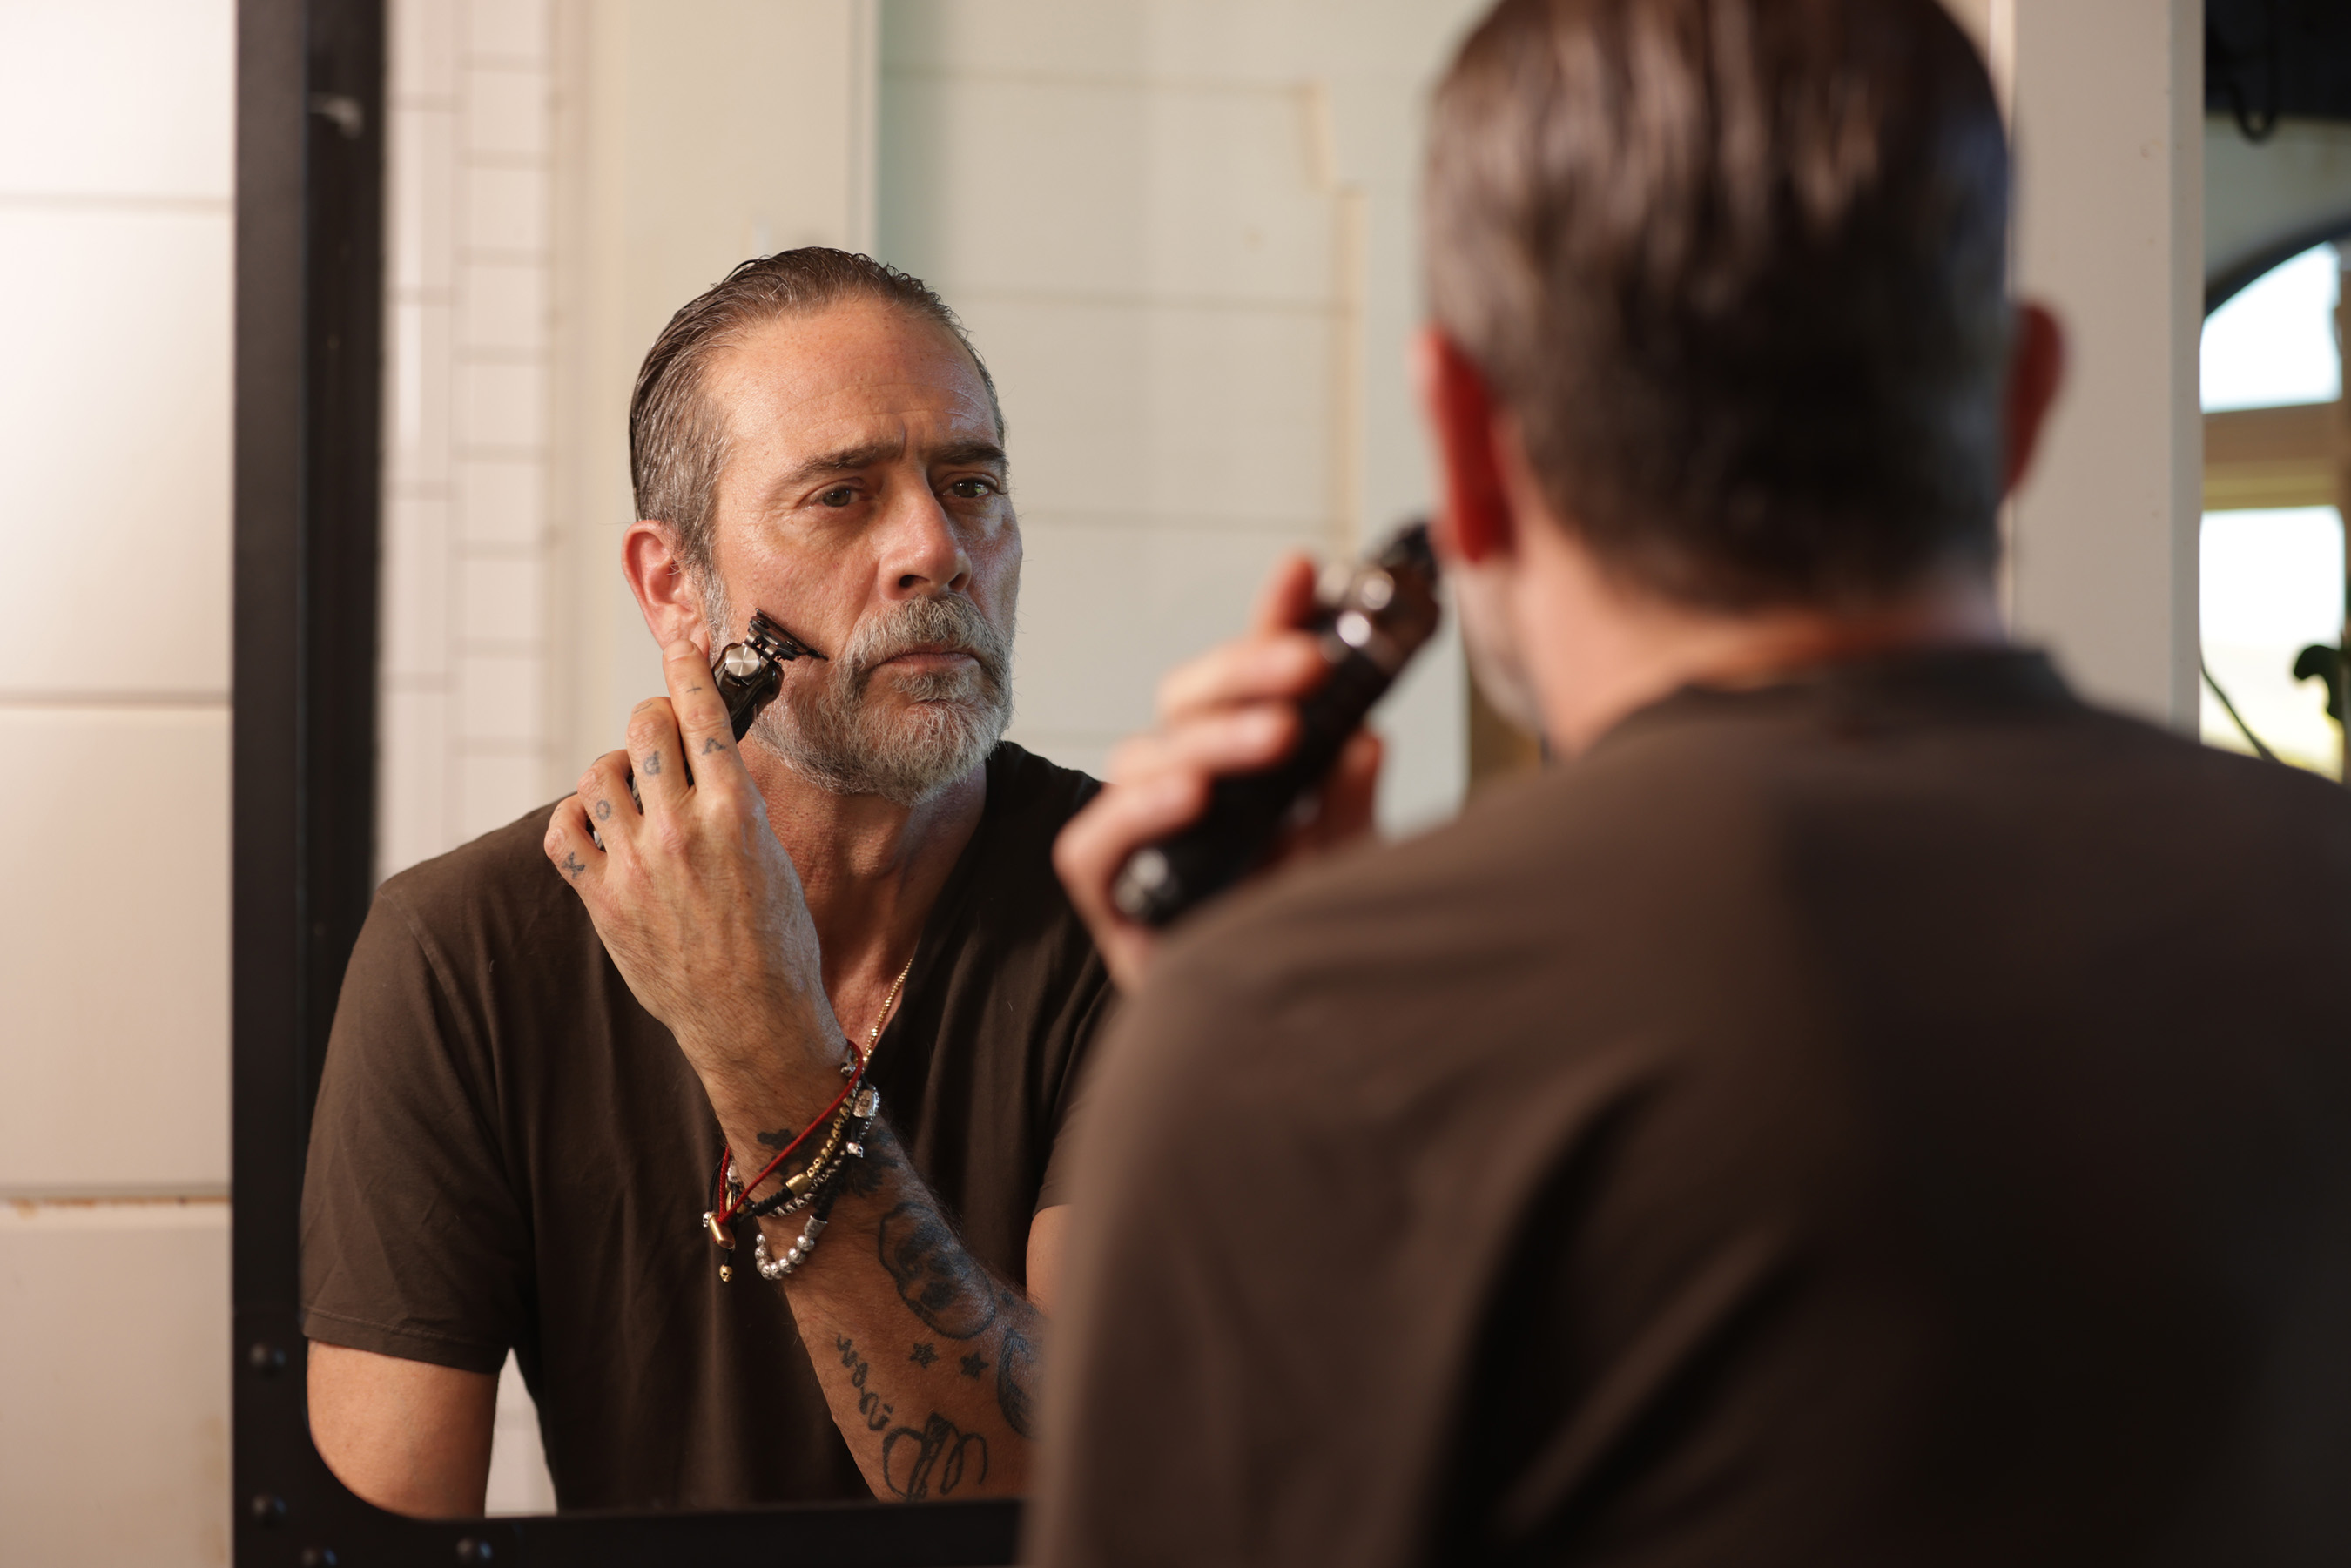 What does Jeffrey Dean Morgan have in common with men’s grooming leader Wahl? They can both deliver a perfectly executed line. This, along with the actor’s iconic beard, makes him the perfect partner to introduce the NEW Wahl® PRO SERIES™ High Visibility Trimmer.